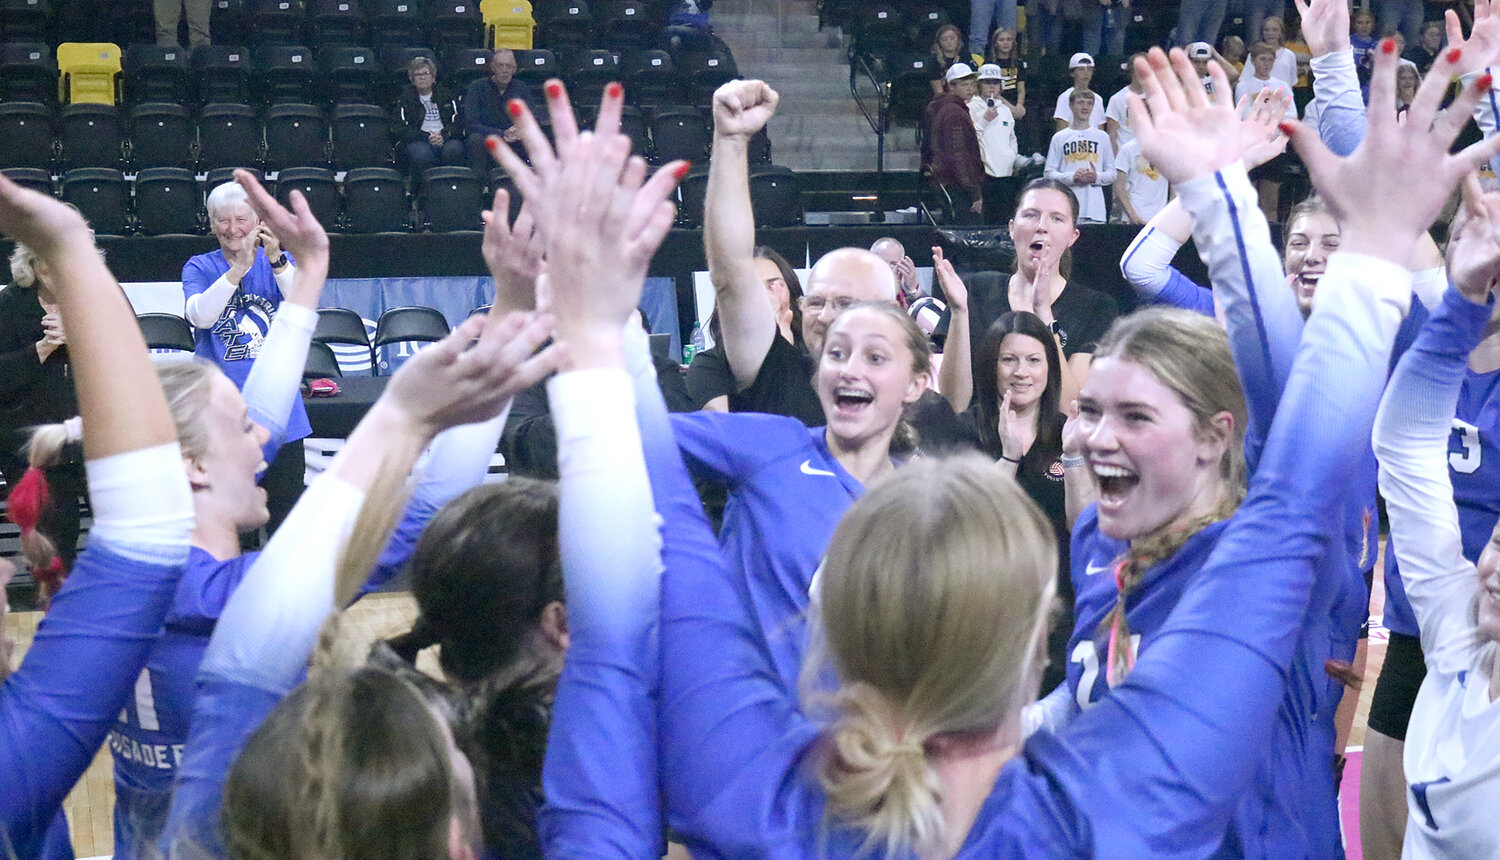 The Lady Crusaders celebrate their second sweep of the IGHSAU State Volleyball Tournament Wednesday at the Xtreme Arena in Coralville.